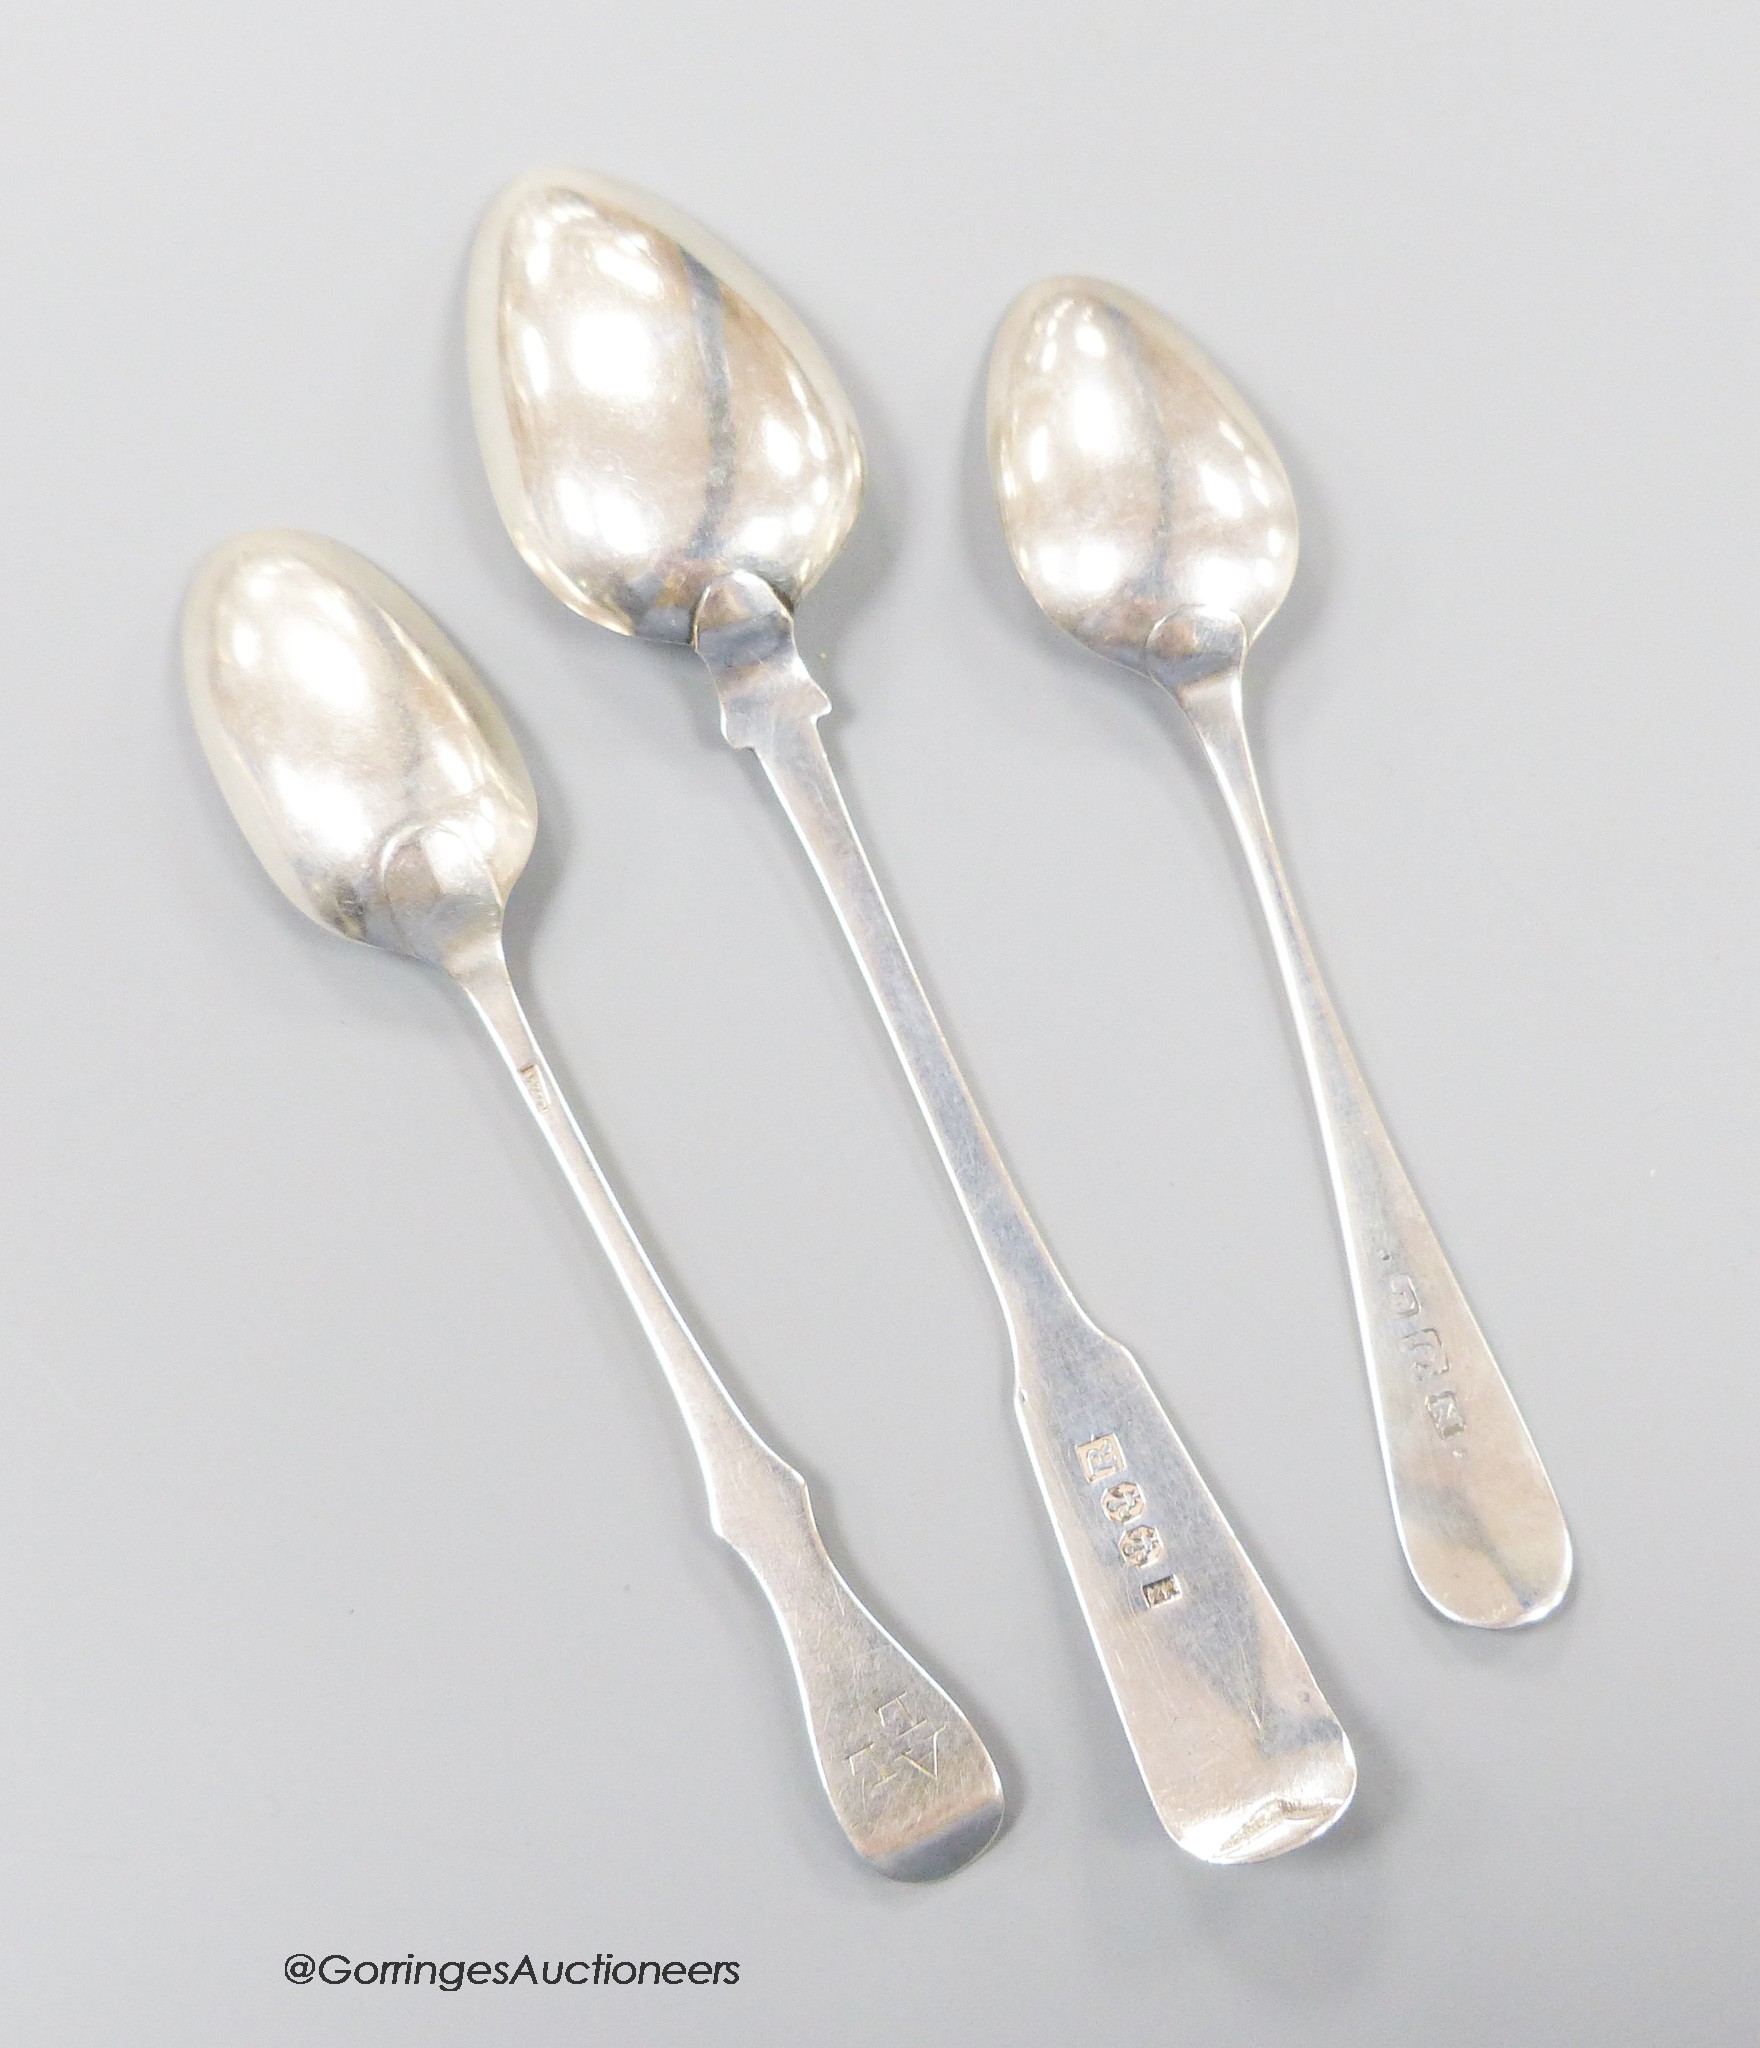 A19th century Scottish provincial silver fiddle pattern teaspoon, Robert Robertson, Cupar, c.1840, 15.1cm and two other smaller teaspoons, Nathaniel Gillert, Aberdeen, c.1800 and William Taylor, Edinburgh, c. 1770, gross